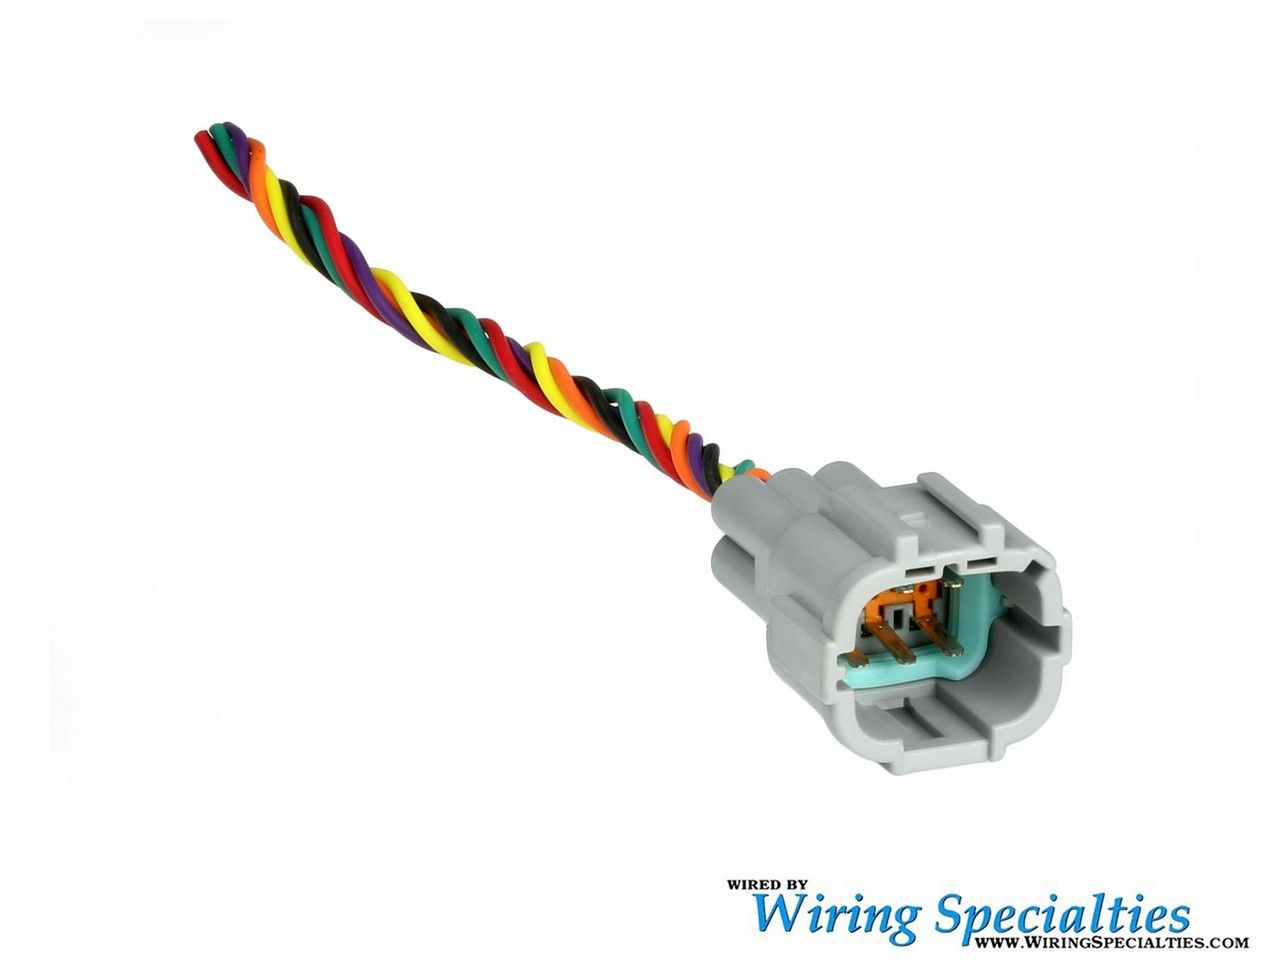 Wiring Specialties Halogen Headlight Connector w/ Pigtails, 6 Pin Male - Nissan 350Z 03-05 Z33